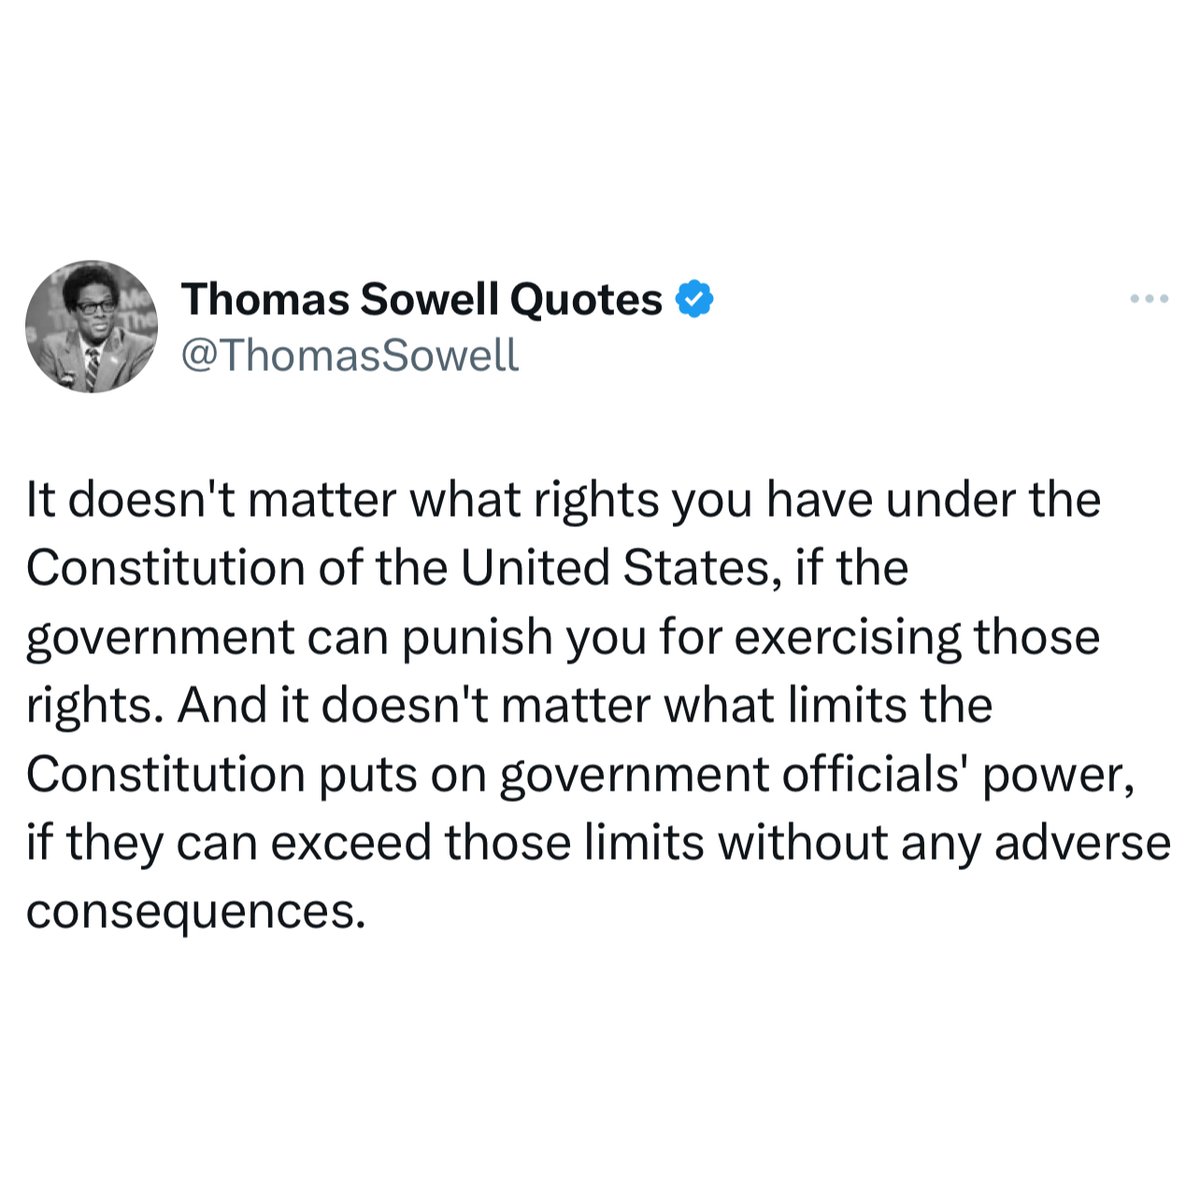 We should be governed according to the Constitution, not the whims of the government.